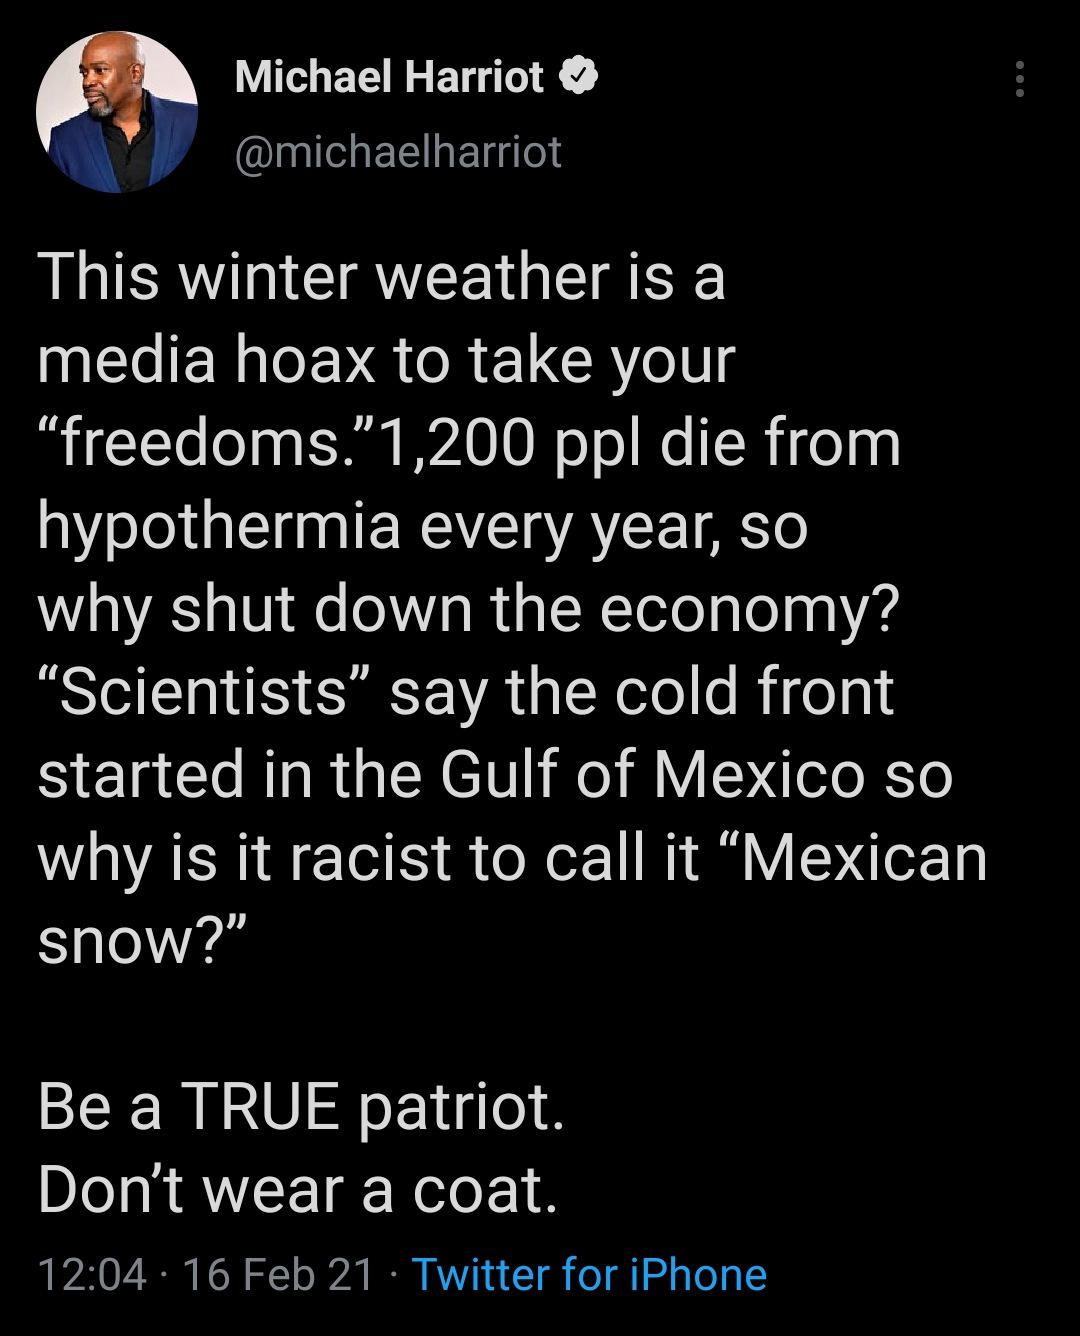 atmosphere - Michael Harriot This winter weather is a media hoax to take your "freedoms."1,200 ppl die from hypothermia every year, so why shut down the economy? Scientists say the cold front started in the Gulf of Mexico so why is it racist to call it Me